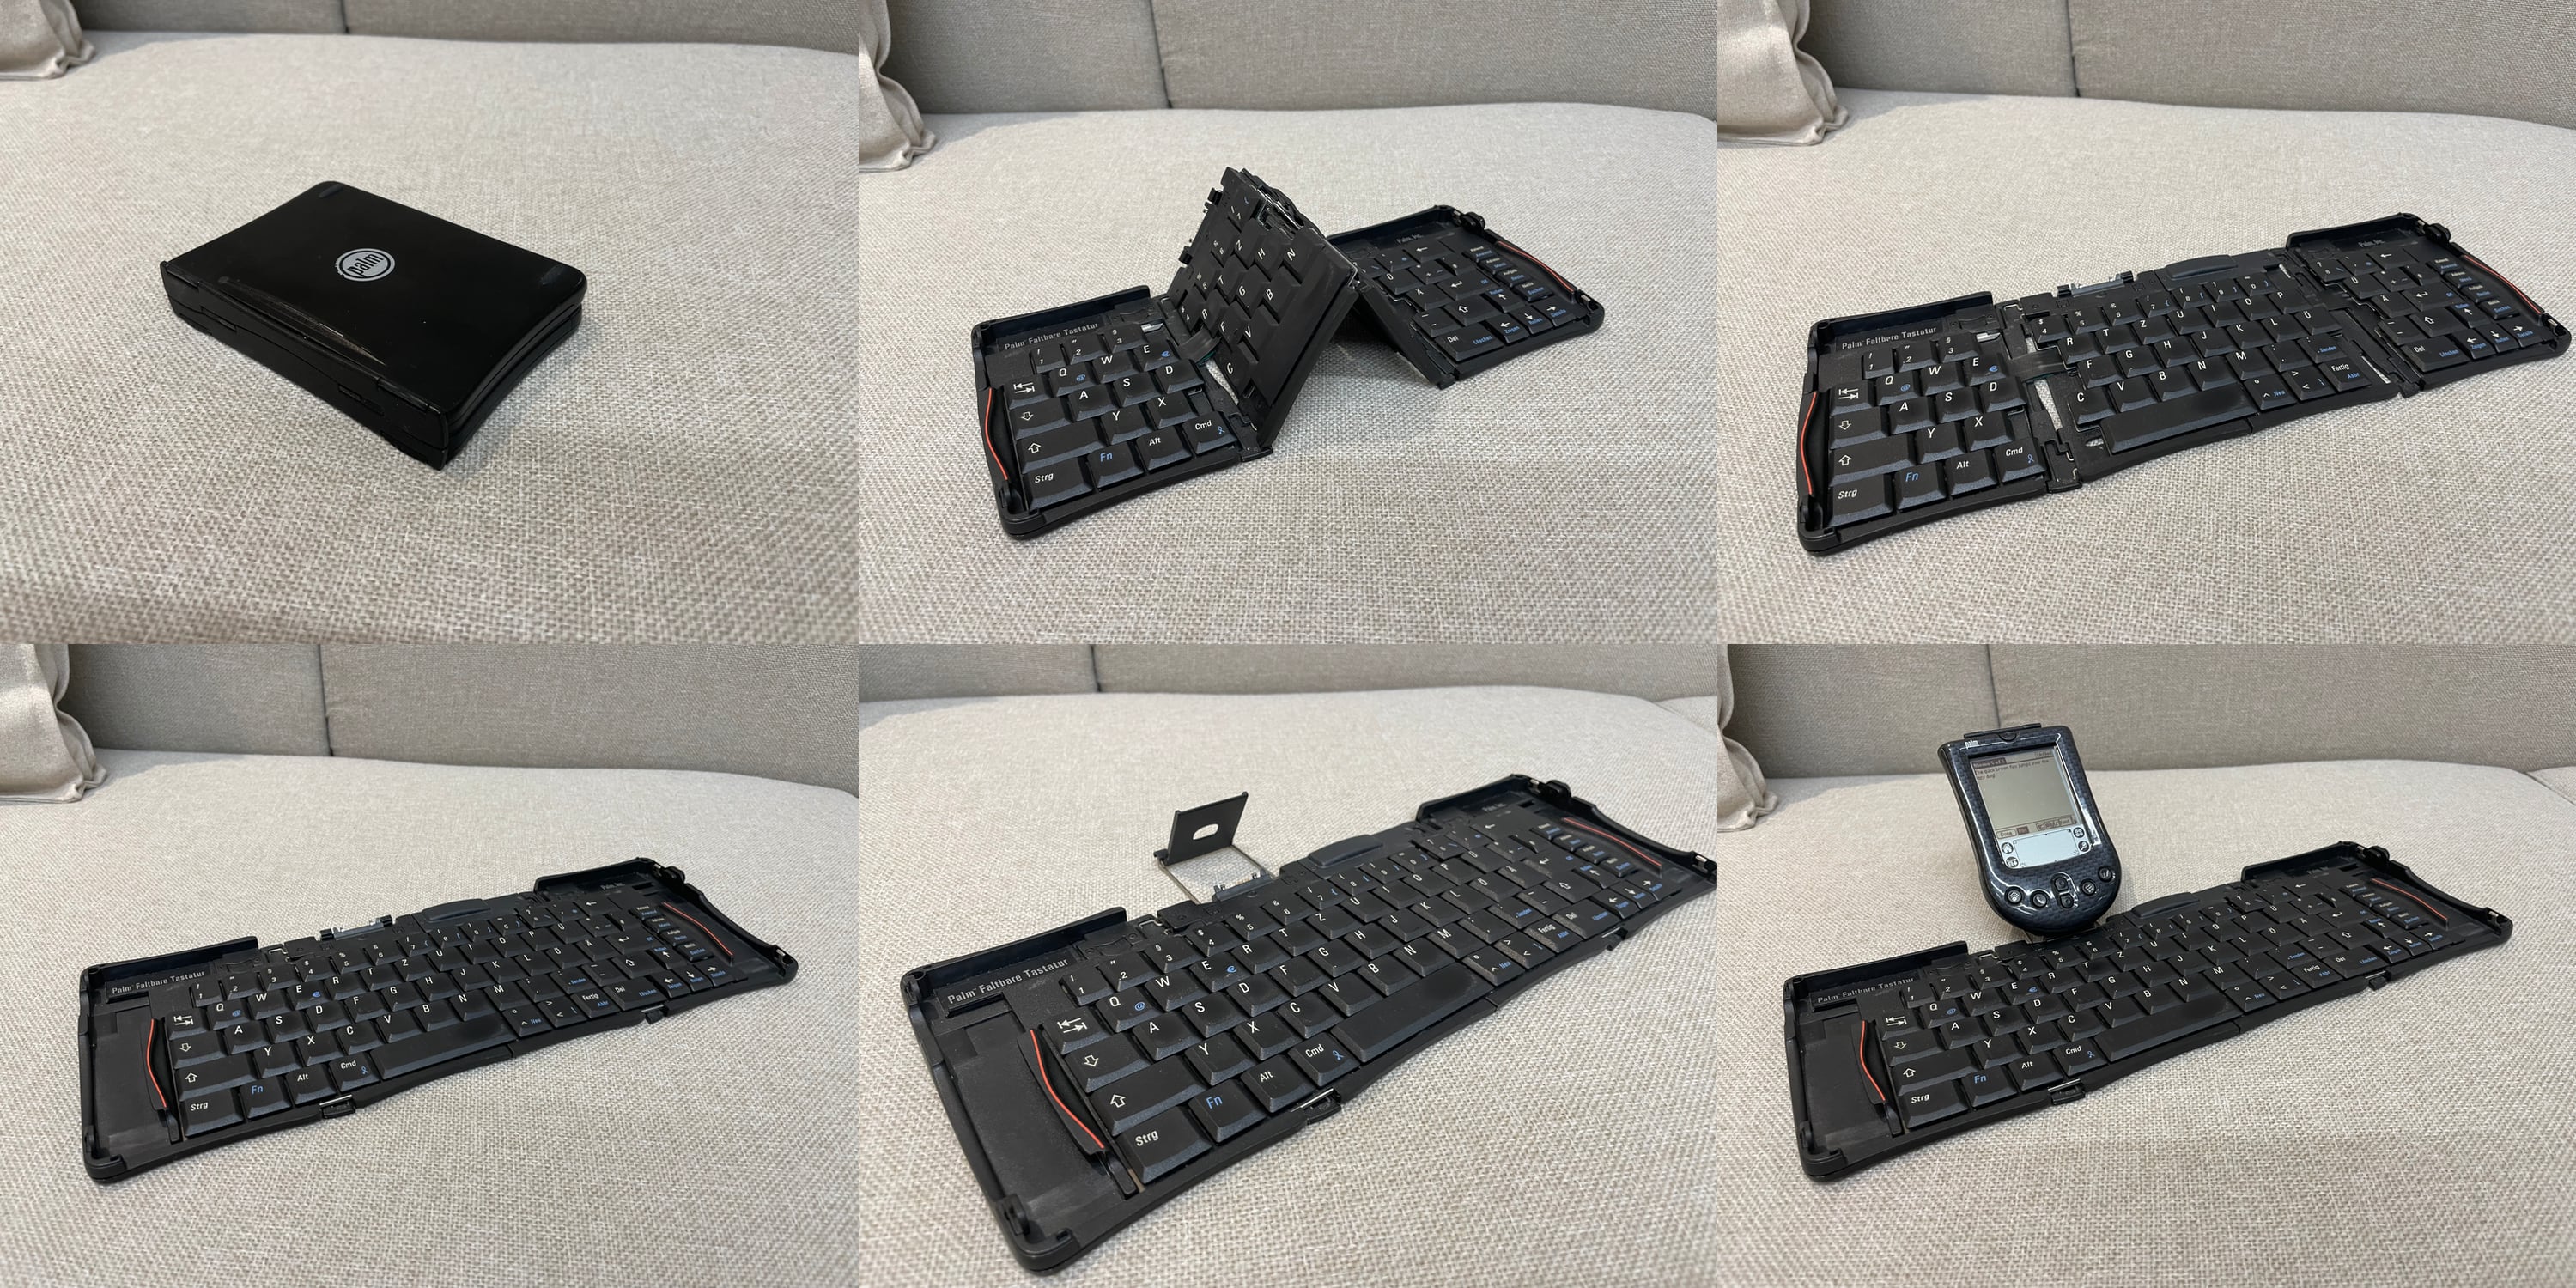 The Stowaway keyboard opening up, fastening and finally ready to type with the Palm m125